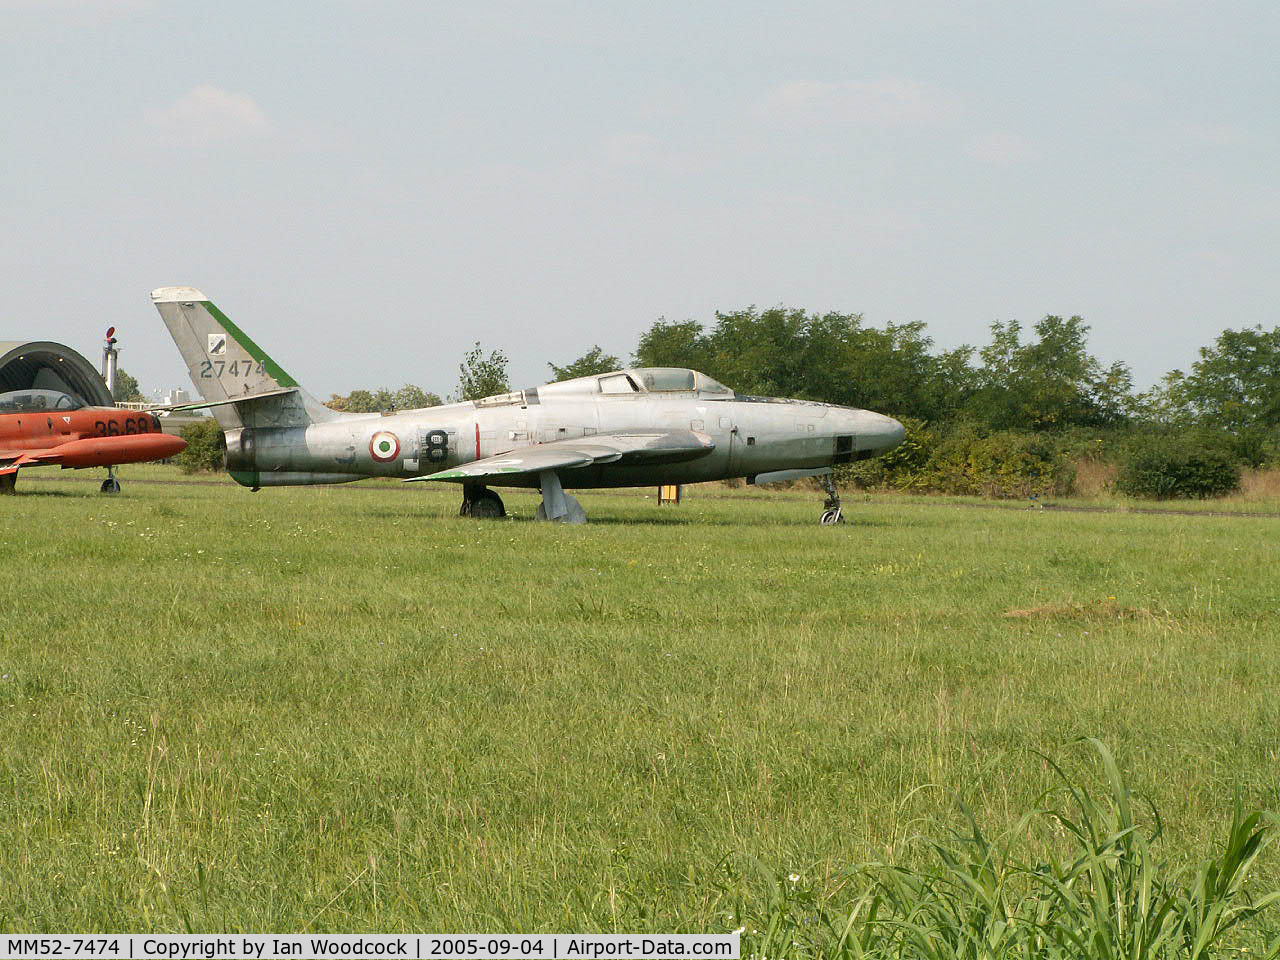 MM52-7474, 1952 Republic RF-84F Thunderflash C/N Not found (52-7474), Republic RF-84F/Preserved/Rivolto-Udine (composite airframe,parts of 52-7463)